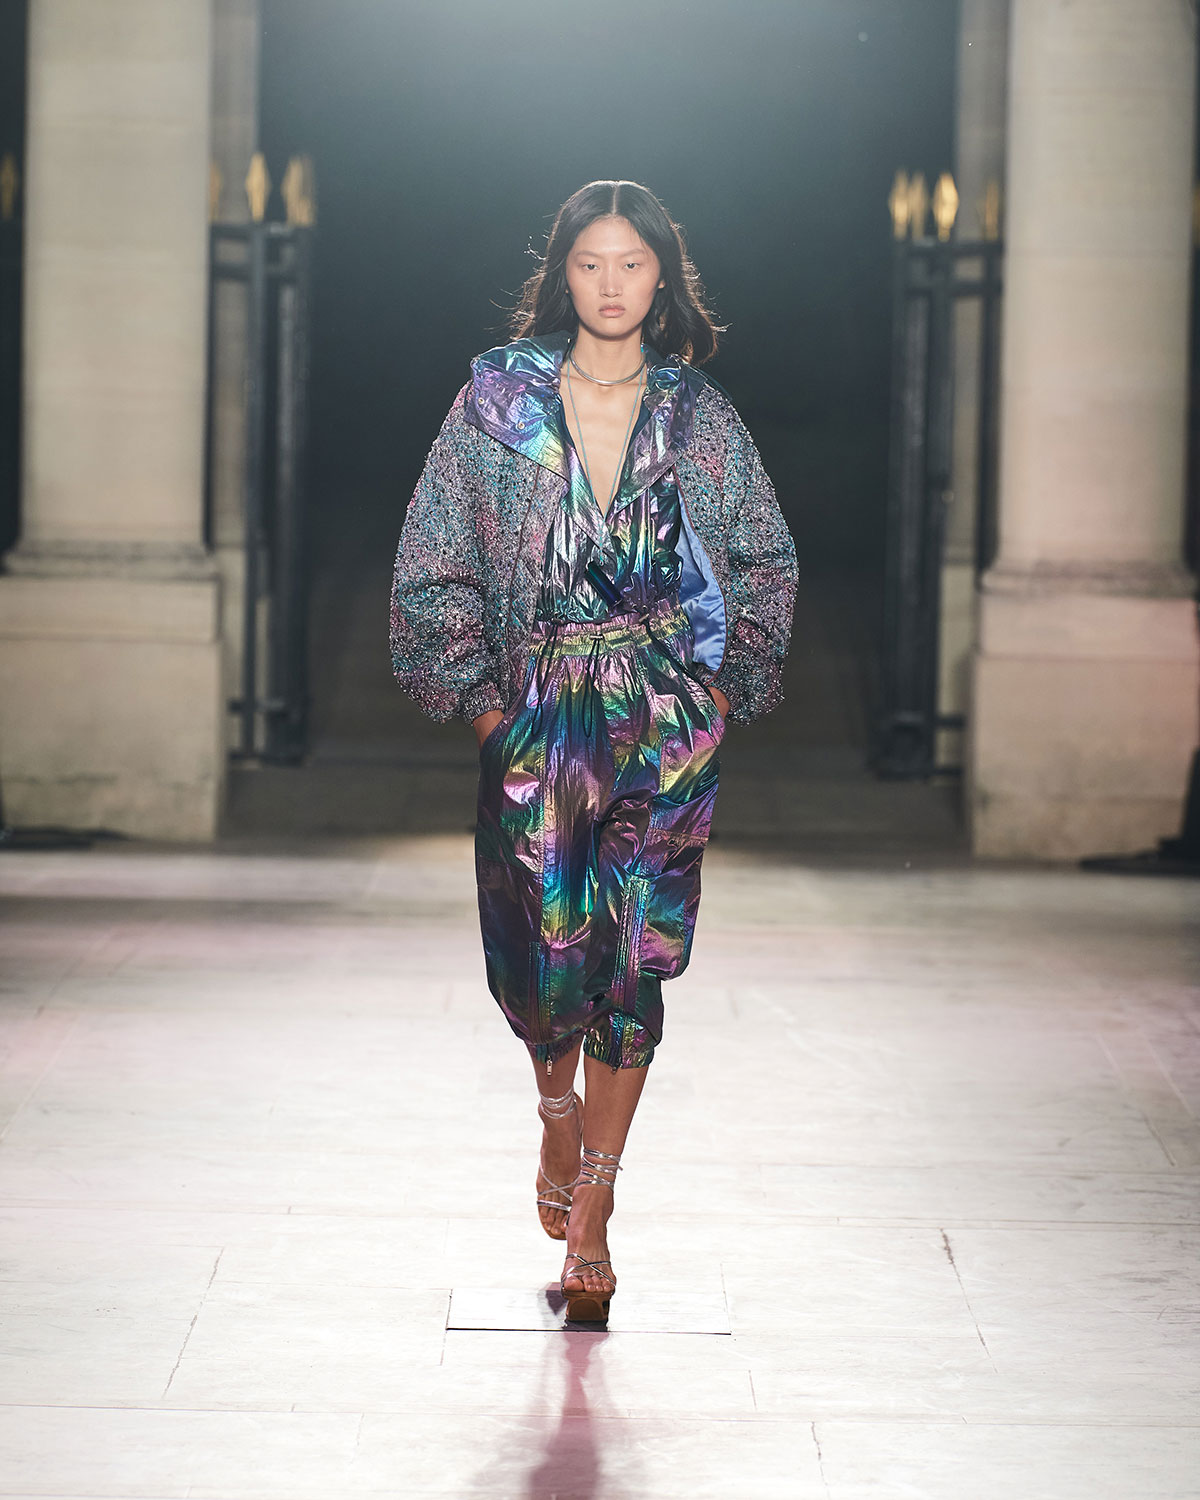 Marant Summer 2022 Collection | The Fashionography